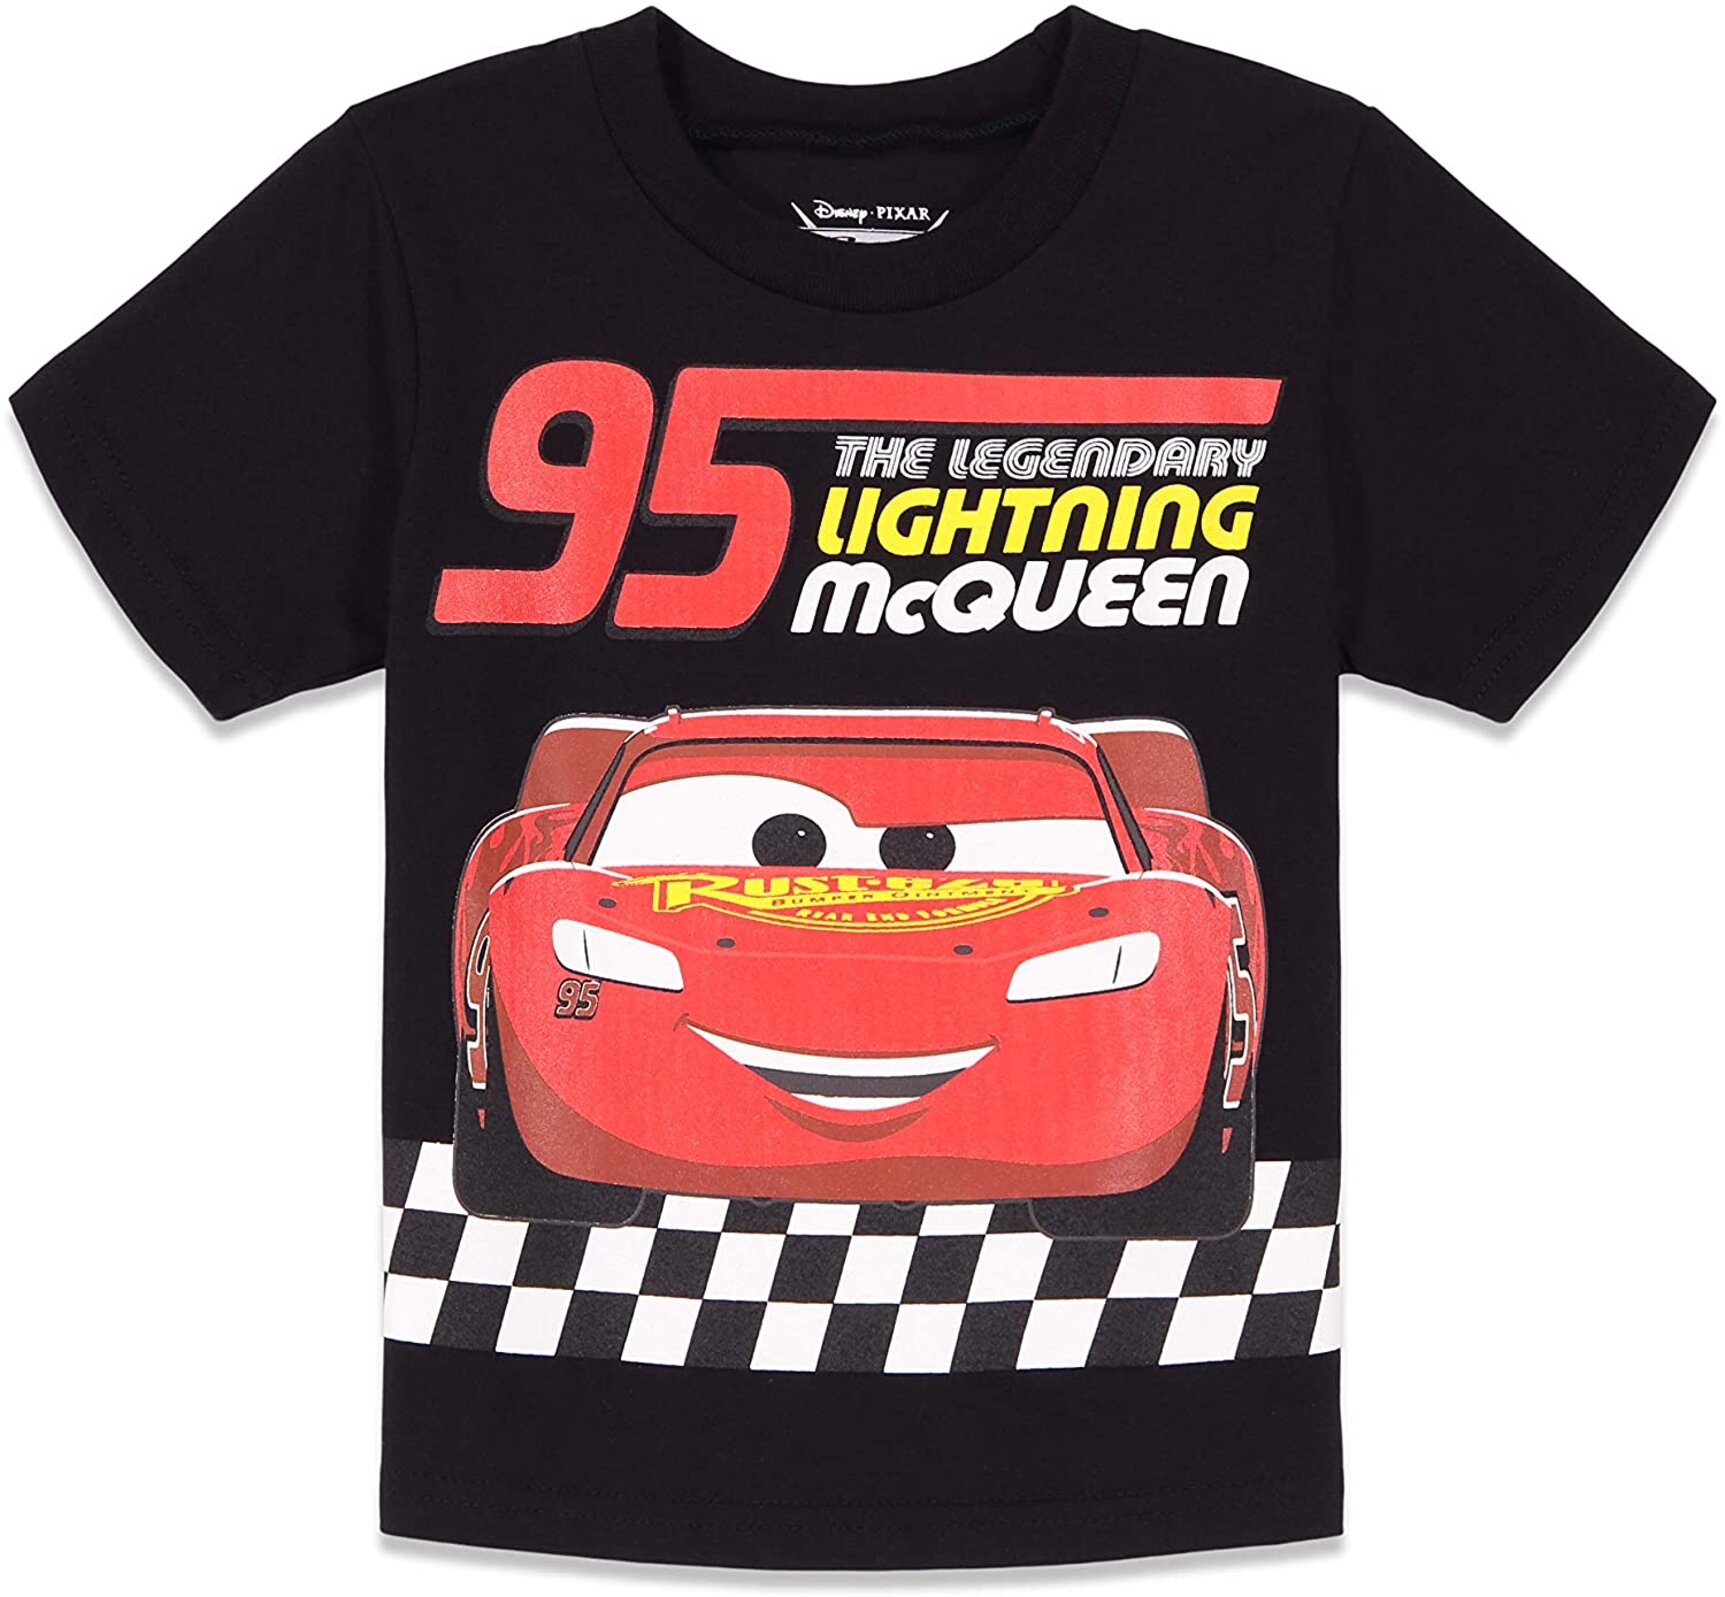 Disney Pixar Cars Lightning McQueen Tow Mater 3 Pack T-Shirts Infant to ...